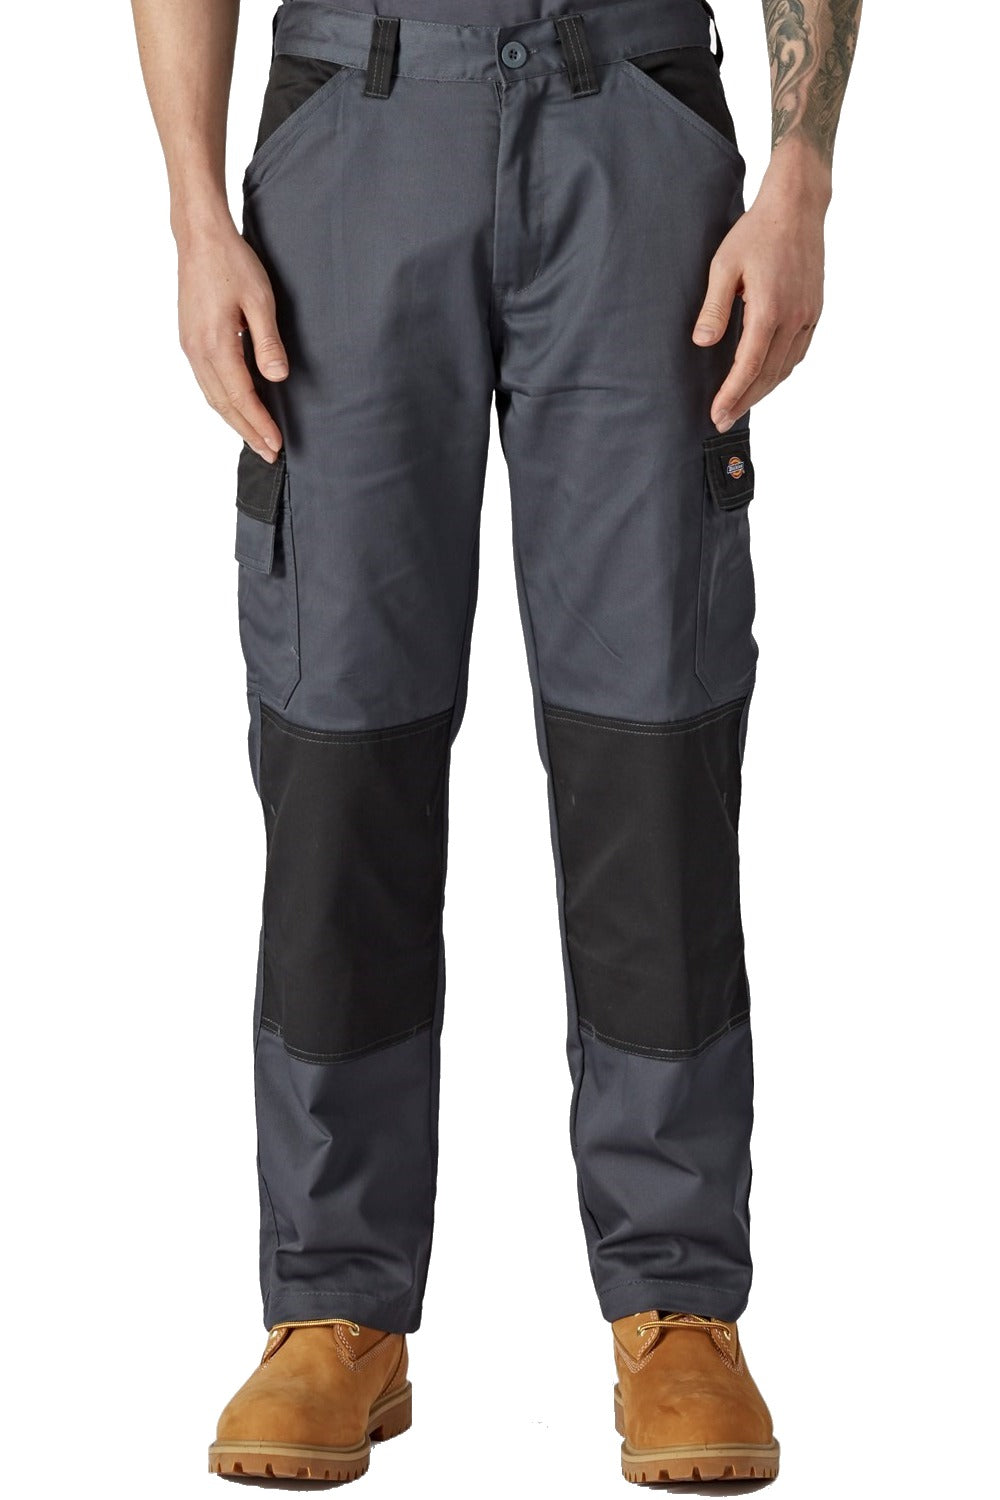 Dickies Everyday GreyBlack Mens Multipocket trousers W32 L31   Tradepoint